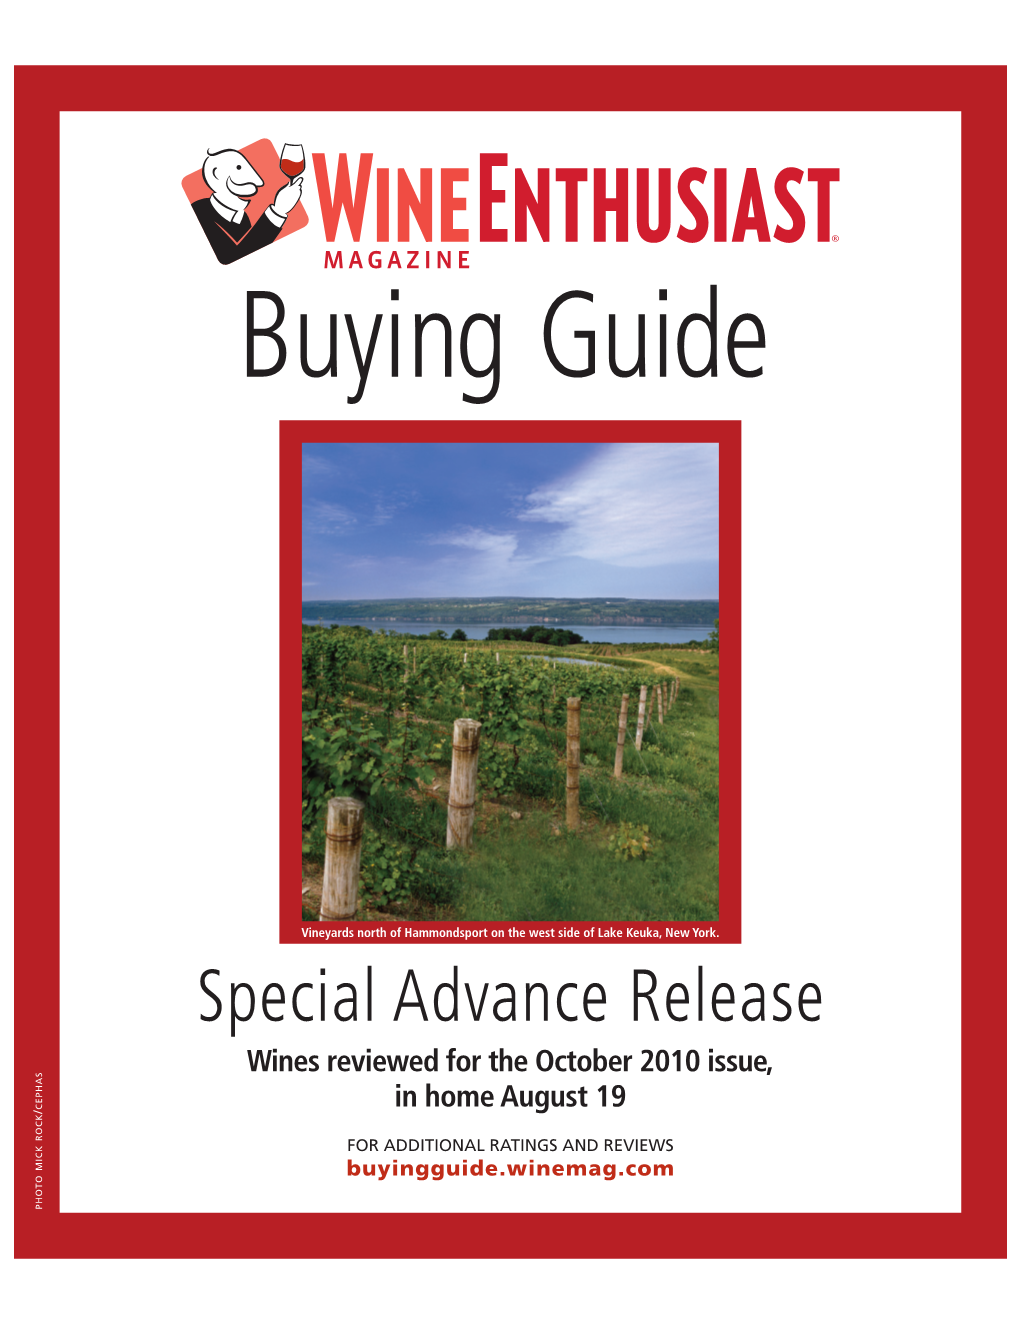 Special Advance Release Wines Reviewed for the October 2010 Issue